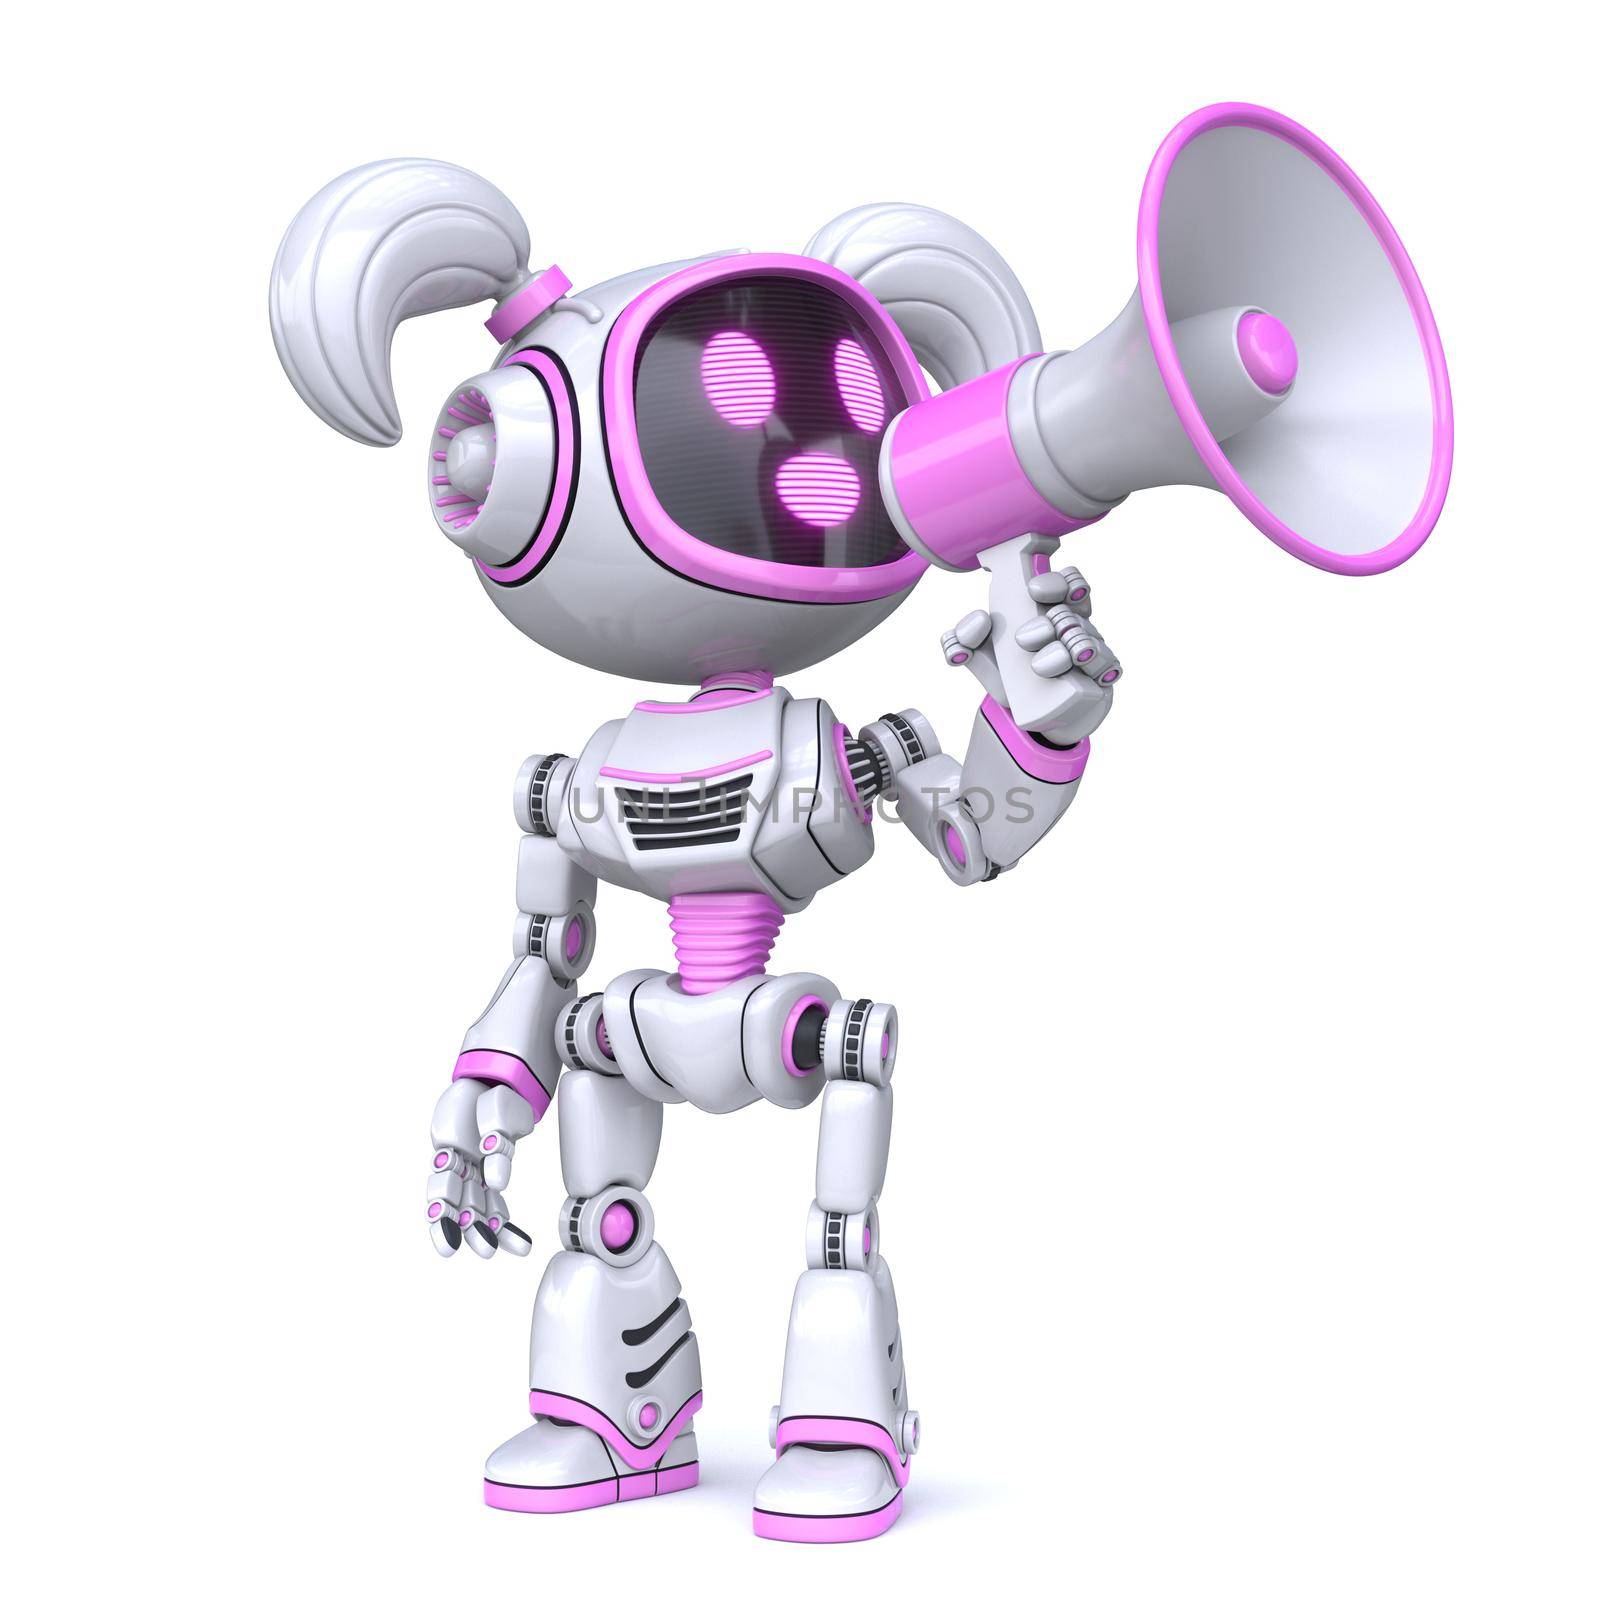 Cute pink girl robot with megaphone 3D rendering illustration isolated on white background